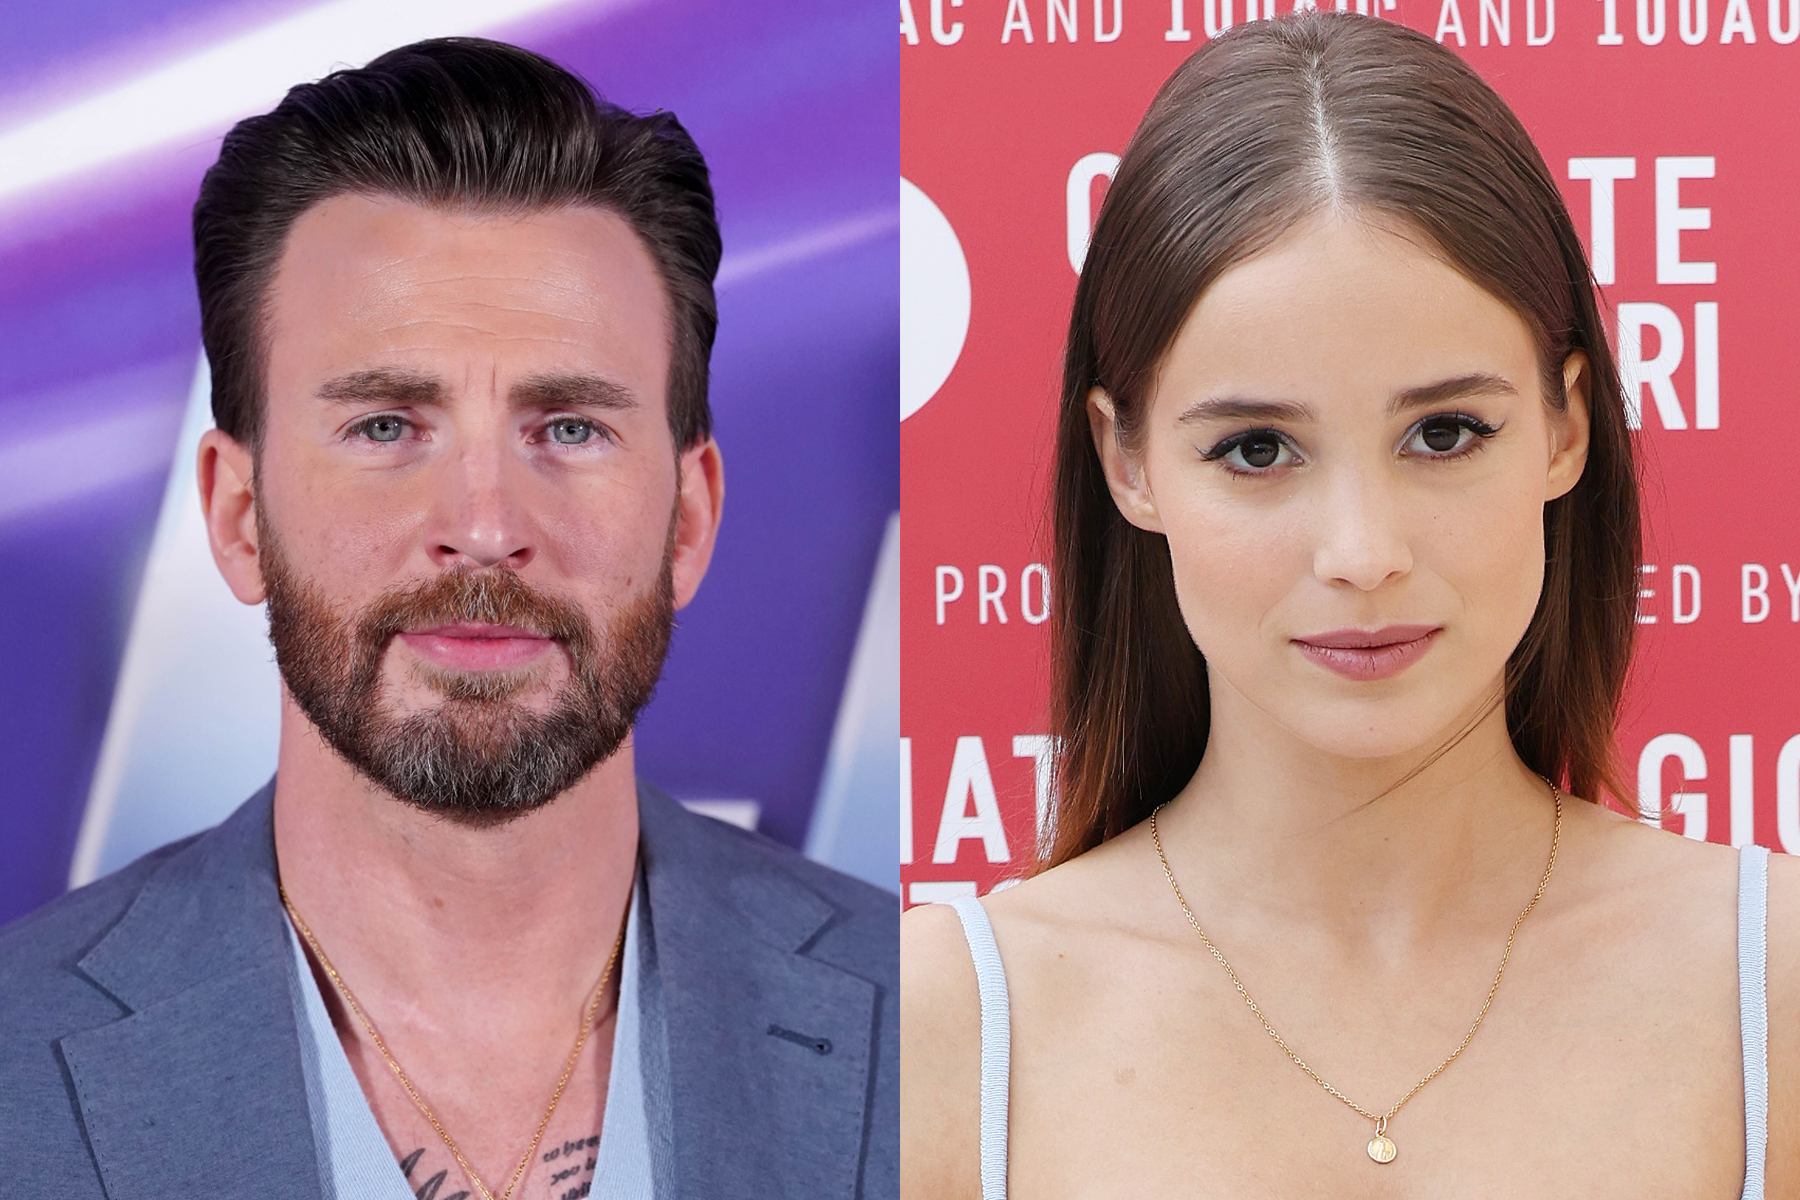 <p><span>In November 2022, </span><a href="https://people.com/movies/chris-evans-dating-alba-baptista-source-exclusive/">People</a><span> magazine confirmed that Captain America actor <a href="https://www.wonderwall.com/celebrity/profiles/overview/chris-evans-1462.article">Chris Evans</a> had quietly been dating Portuguese actress Alba Baptista "for over a year and it's serious," a source told the outlet, adding, "They are in love and Chris has never been happier. His family and friends all adore her." </span></p><p><span>One day later on Nov. 11, the couple were photographed holding hands walking through New York City's Central Park (see the photos </span><a href="https://www.dailymail.co.uk/tvshowbiz/article-11420601/Chris-Evans-Alba-Baptista-seen-holding-hands-romantic-stroll-NYC.html">here</a><span>). Speculation about a romance between the pair -- who have 16 years between them -- first surfaced earlier in the year on social media gossip account Deux Moi when the Marvel star was 40 and the "Warrior Nun" actress was 24. </span></p><p>Almost two months after People's dating confirmation, Chris confirmed their romance and made things Instagram official in January 2023 when he posted a series of clips on his Instagram Story titled "A look back at 2022" that showed him and Alba repeatedly scaring each other with loud yelling.</p><p>But on Sept. 9, 2023, Chris and Alba took the ultimate step: They married at their Boston-area home in front of A-list pals including Jeremy Renner, Robert Downey Jr. and wife Susan Downey, Chris Hemsworth and wife Elsa Pataky, and John Krasinski and wife Emily Blunt, <a href="https://people.com/chris-evans-marries-alba-baptista-7503006">People</a> magazine reported.</p>